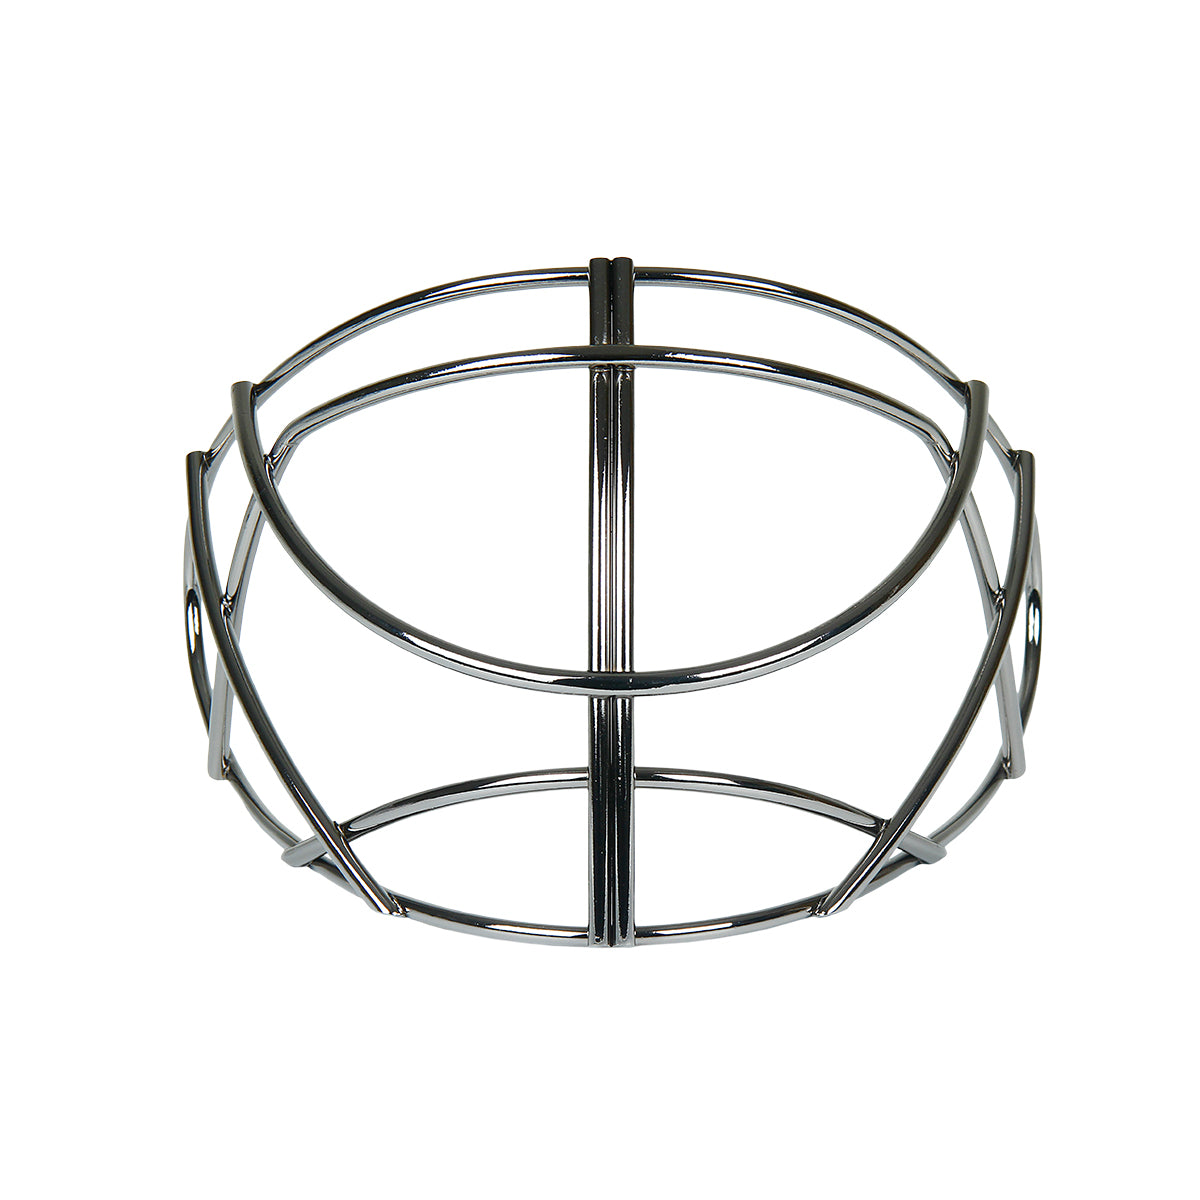 Helmet Grill/Cage - ABS